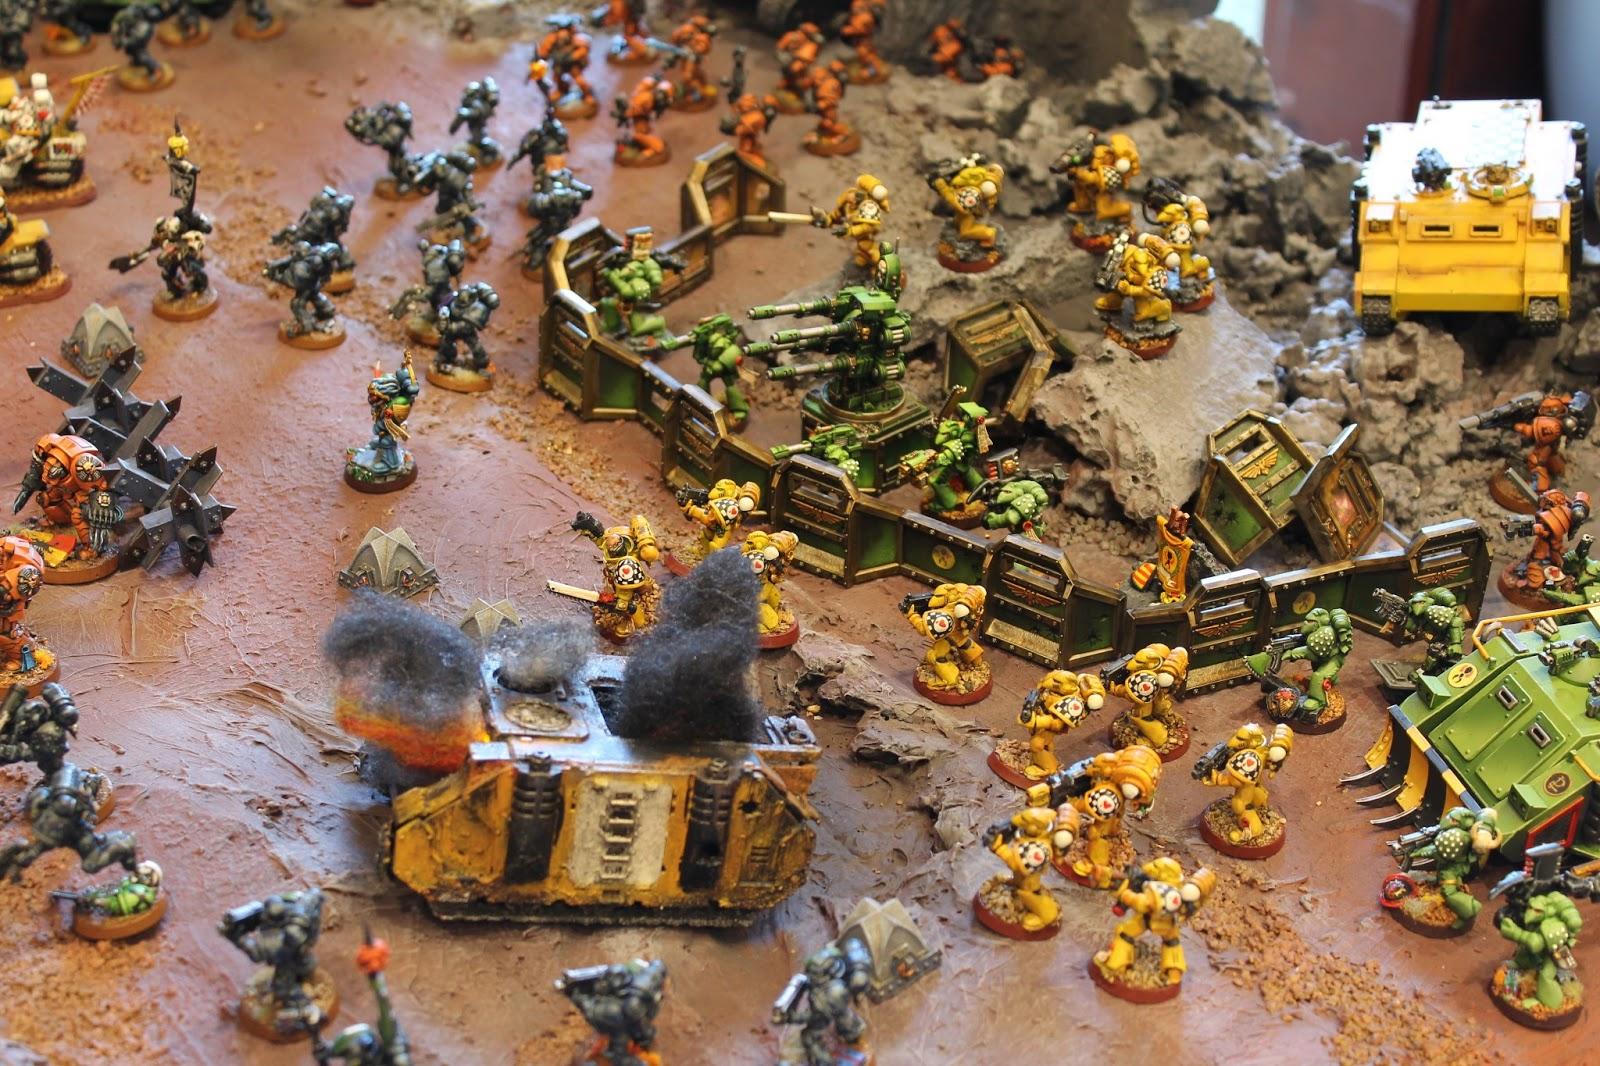 Spikey Bits photo of WoTM Adepticon display